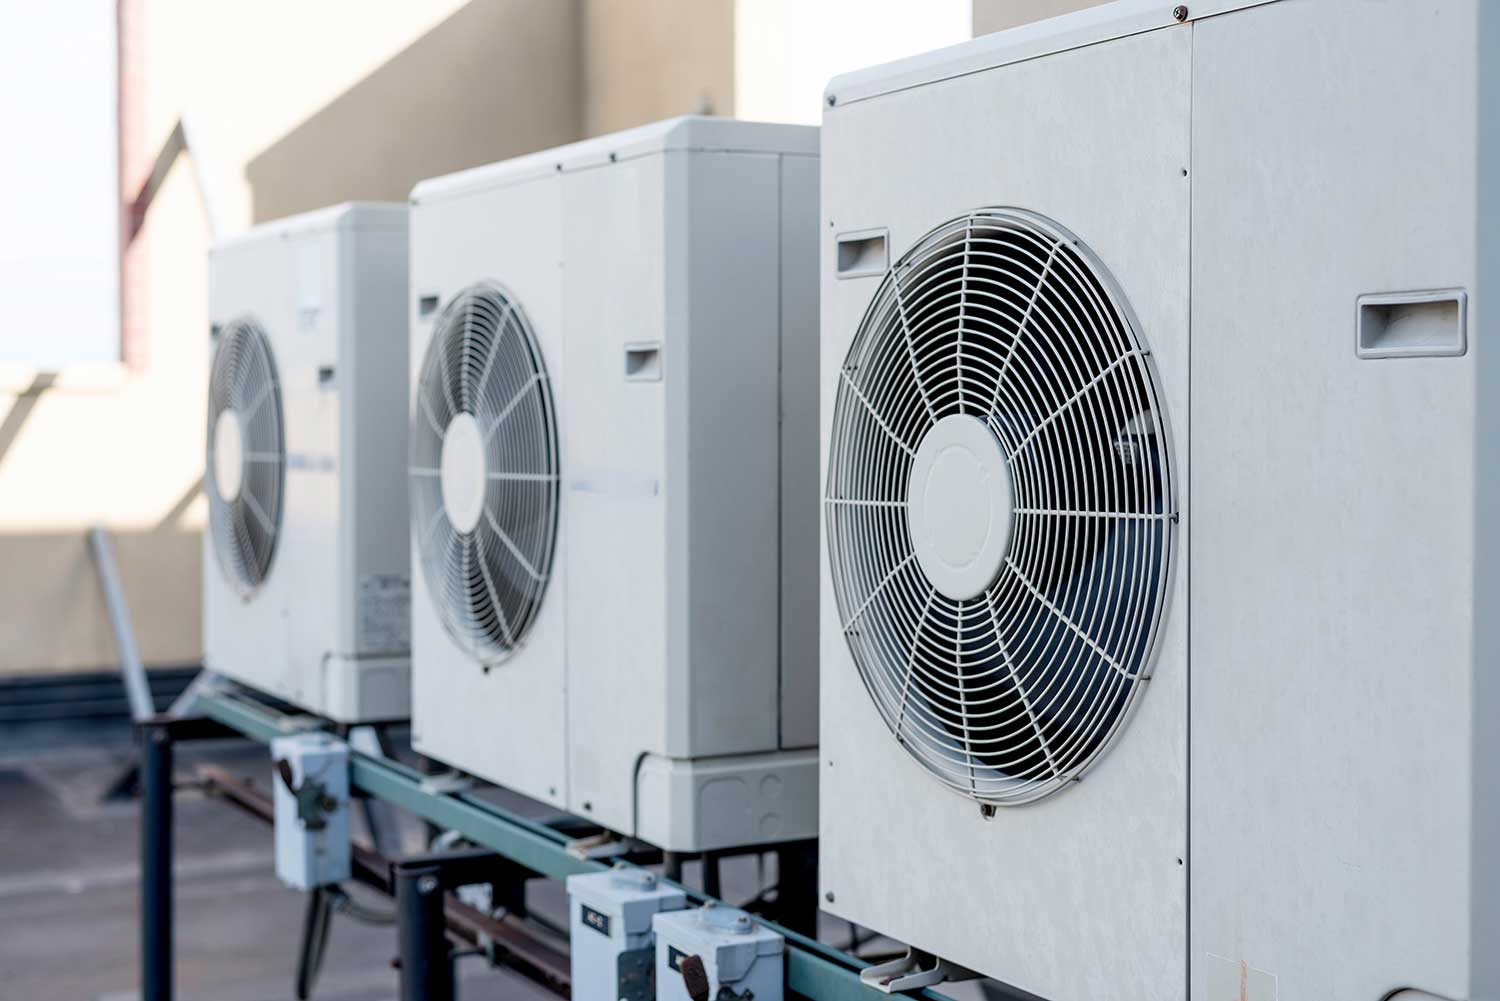 Taking care of your Heating as well as Air Conditioning system is substantial